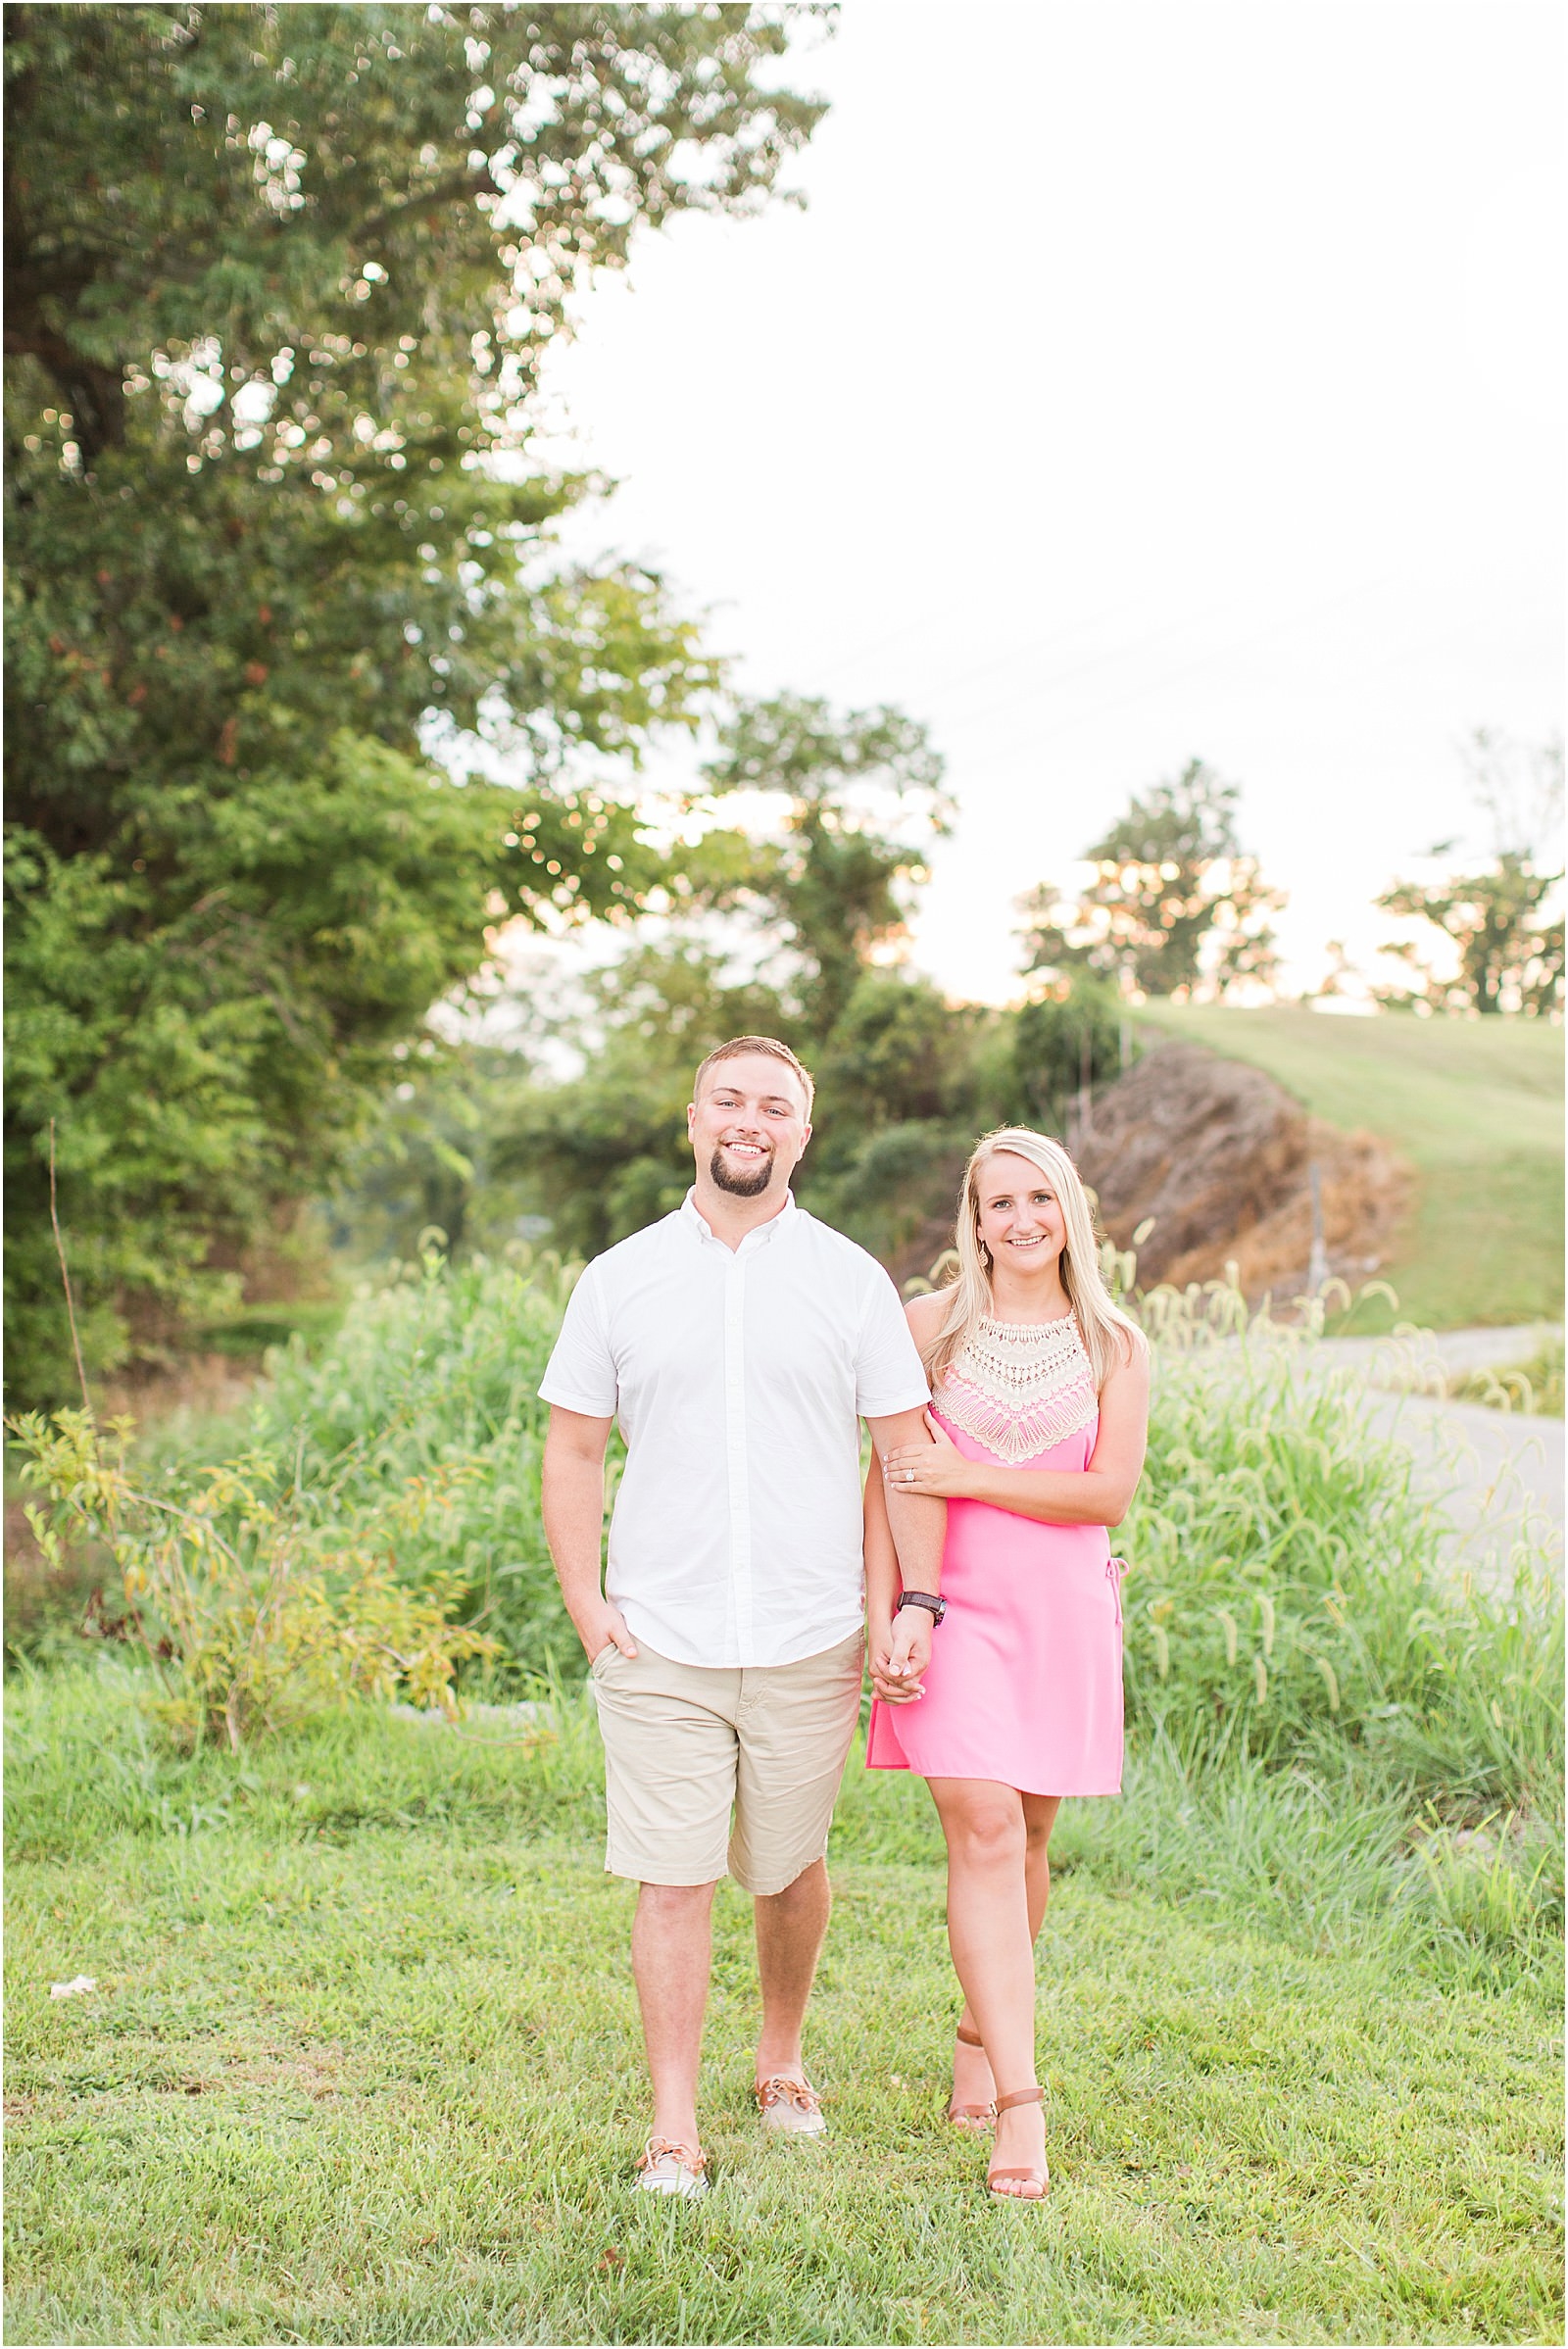 Lauren and Bryce | The Corner House B&ed and Breakfast Engagement Session | Bret and Brandie Photography 015.jpg